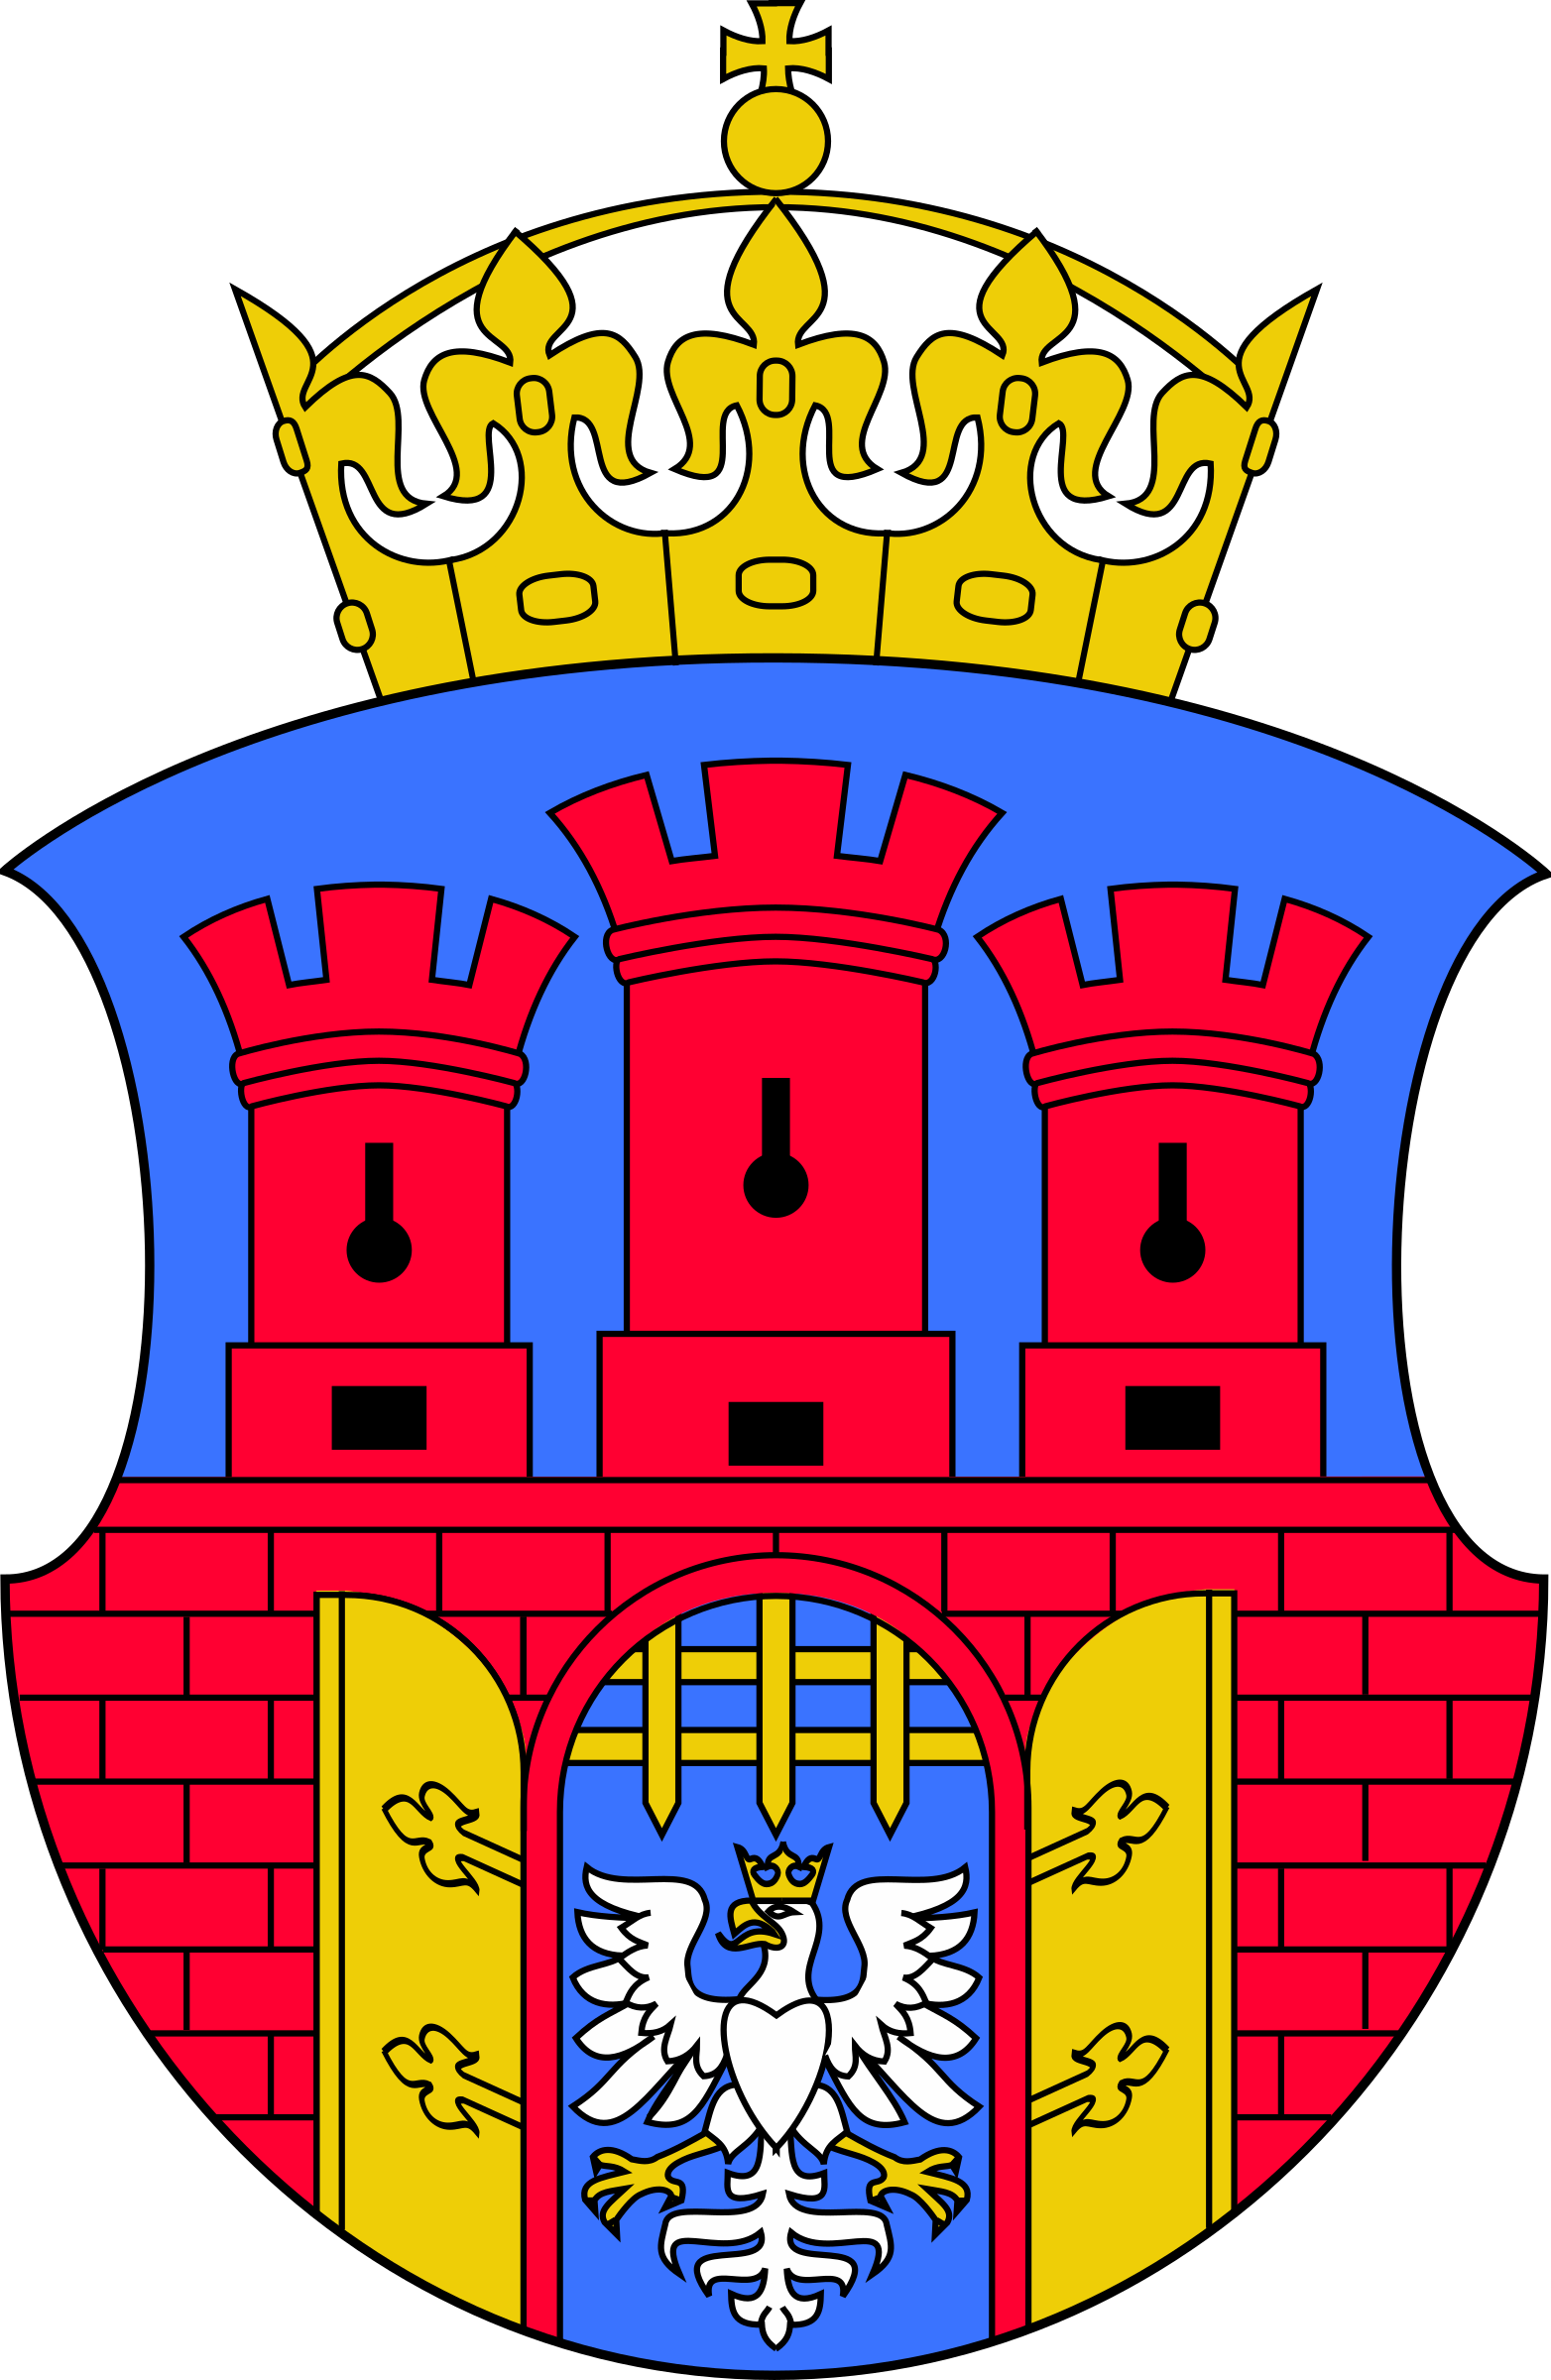 Coat of arms clipart.